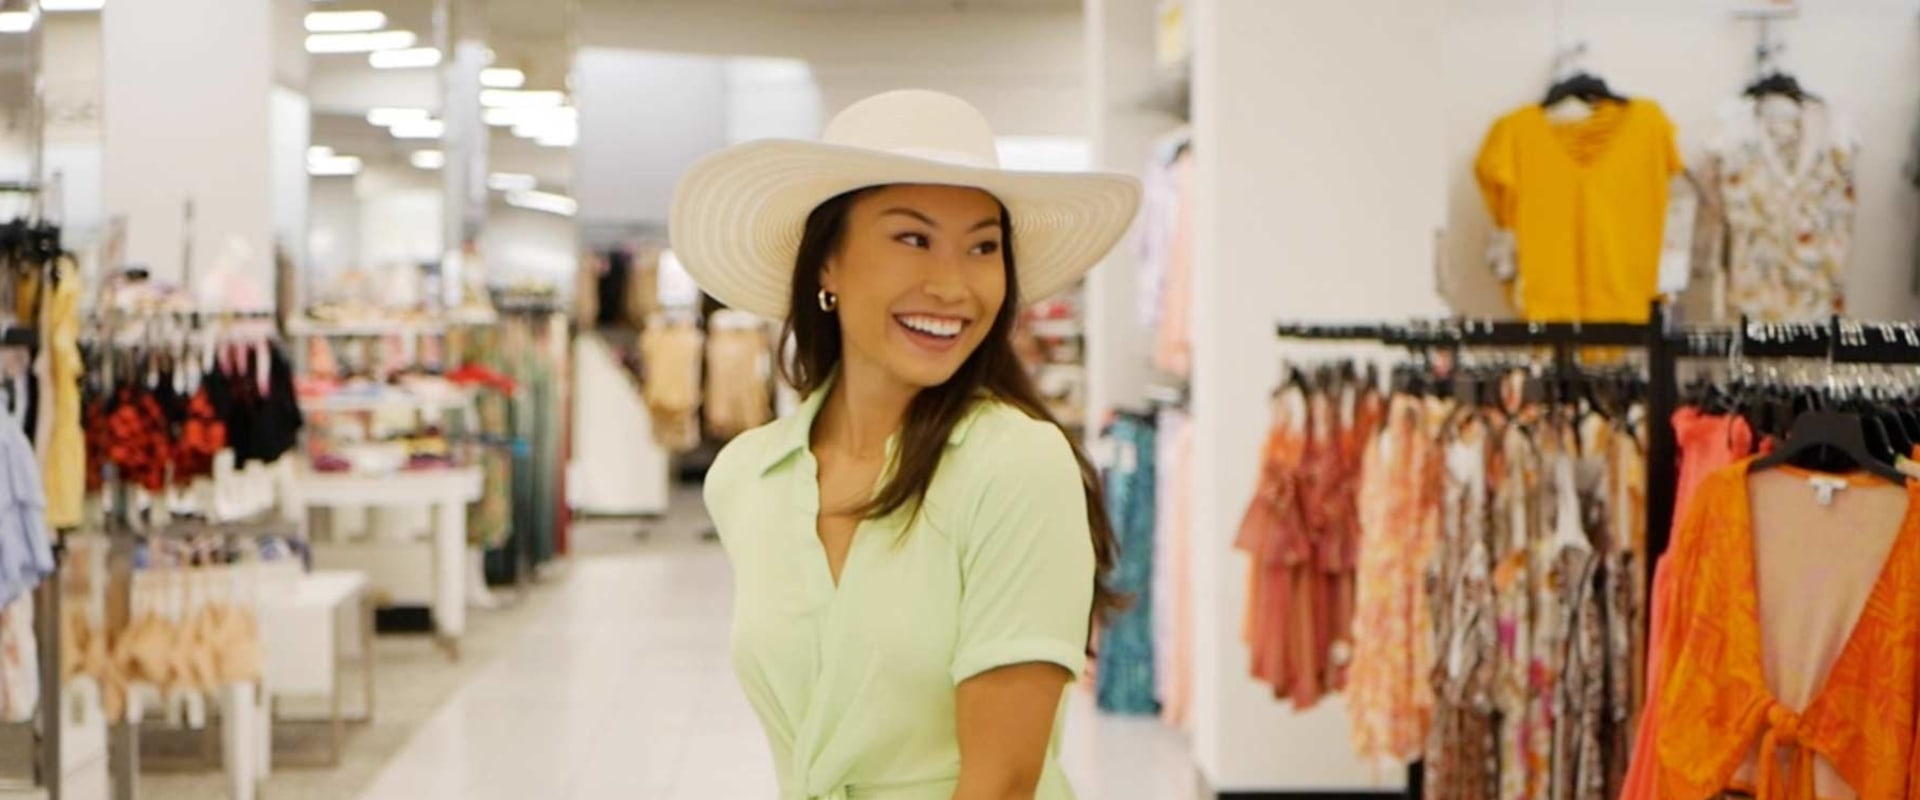 The Best Shopping Spots in Waimalu, Hawaii - A Guide for Residents